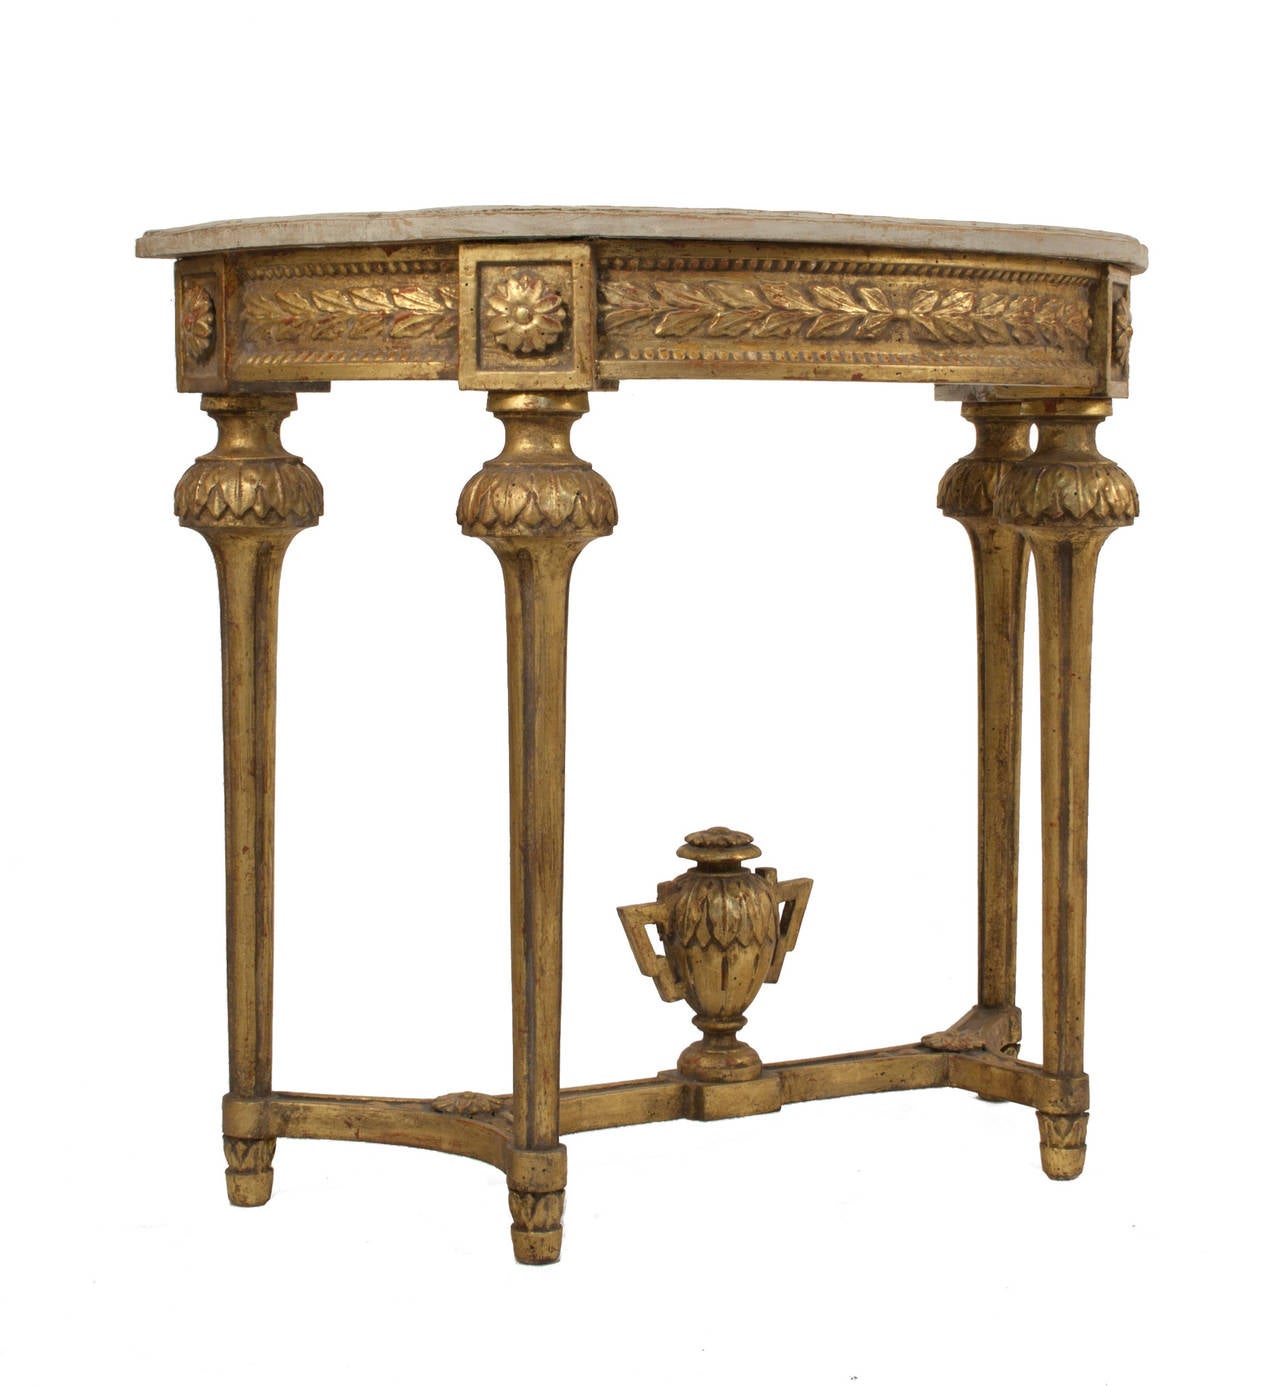 Gustavian console with a worn gilded and grey patina.